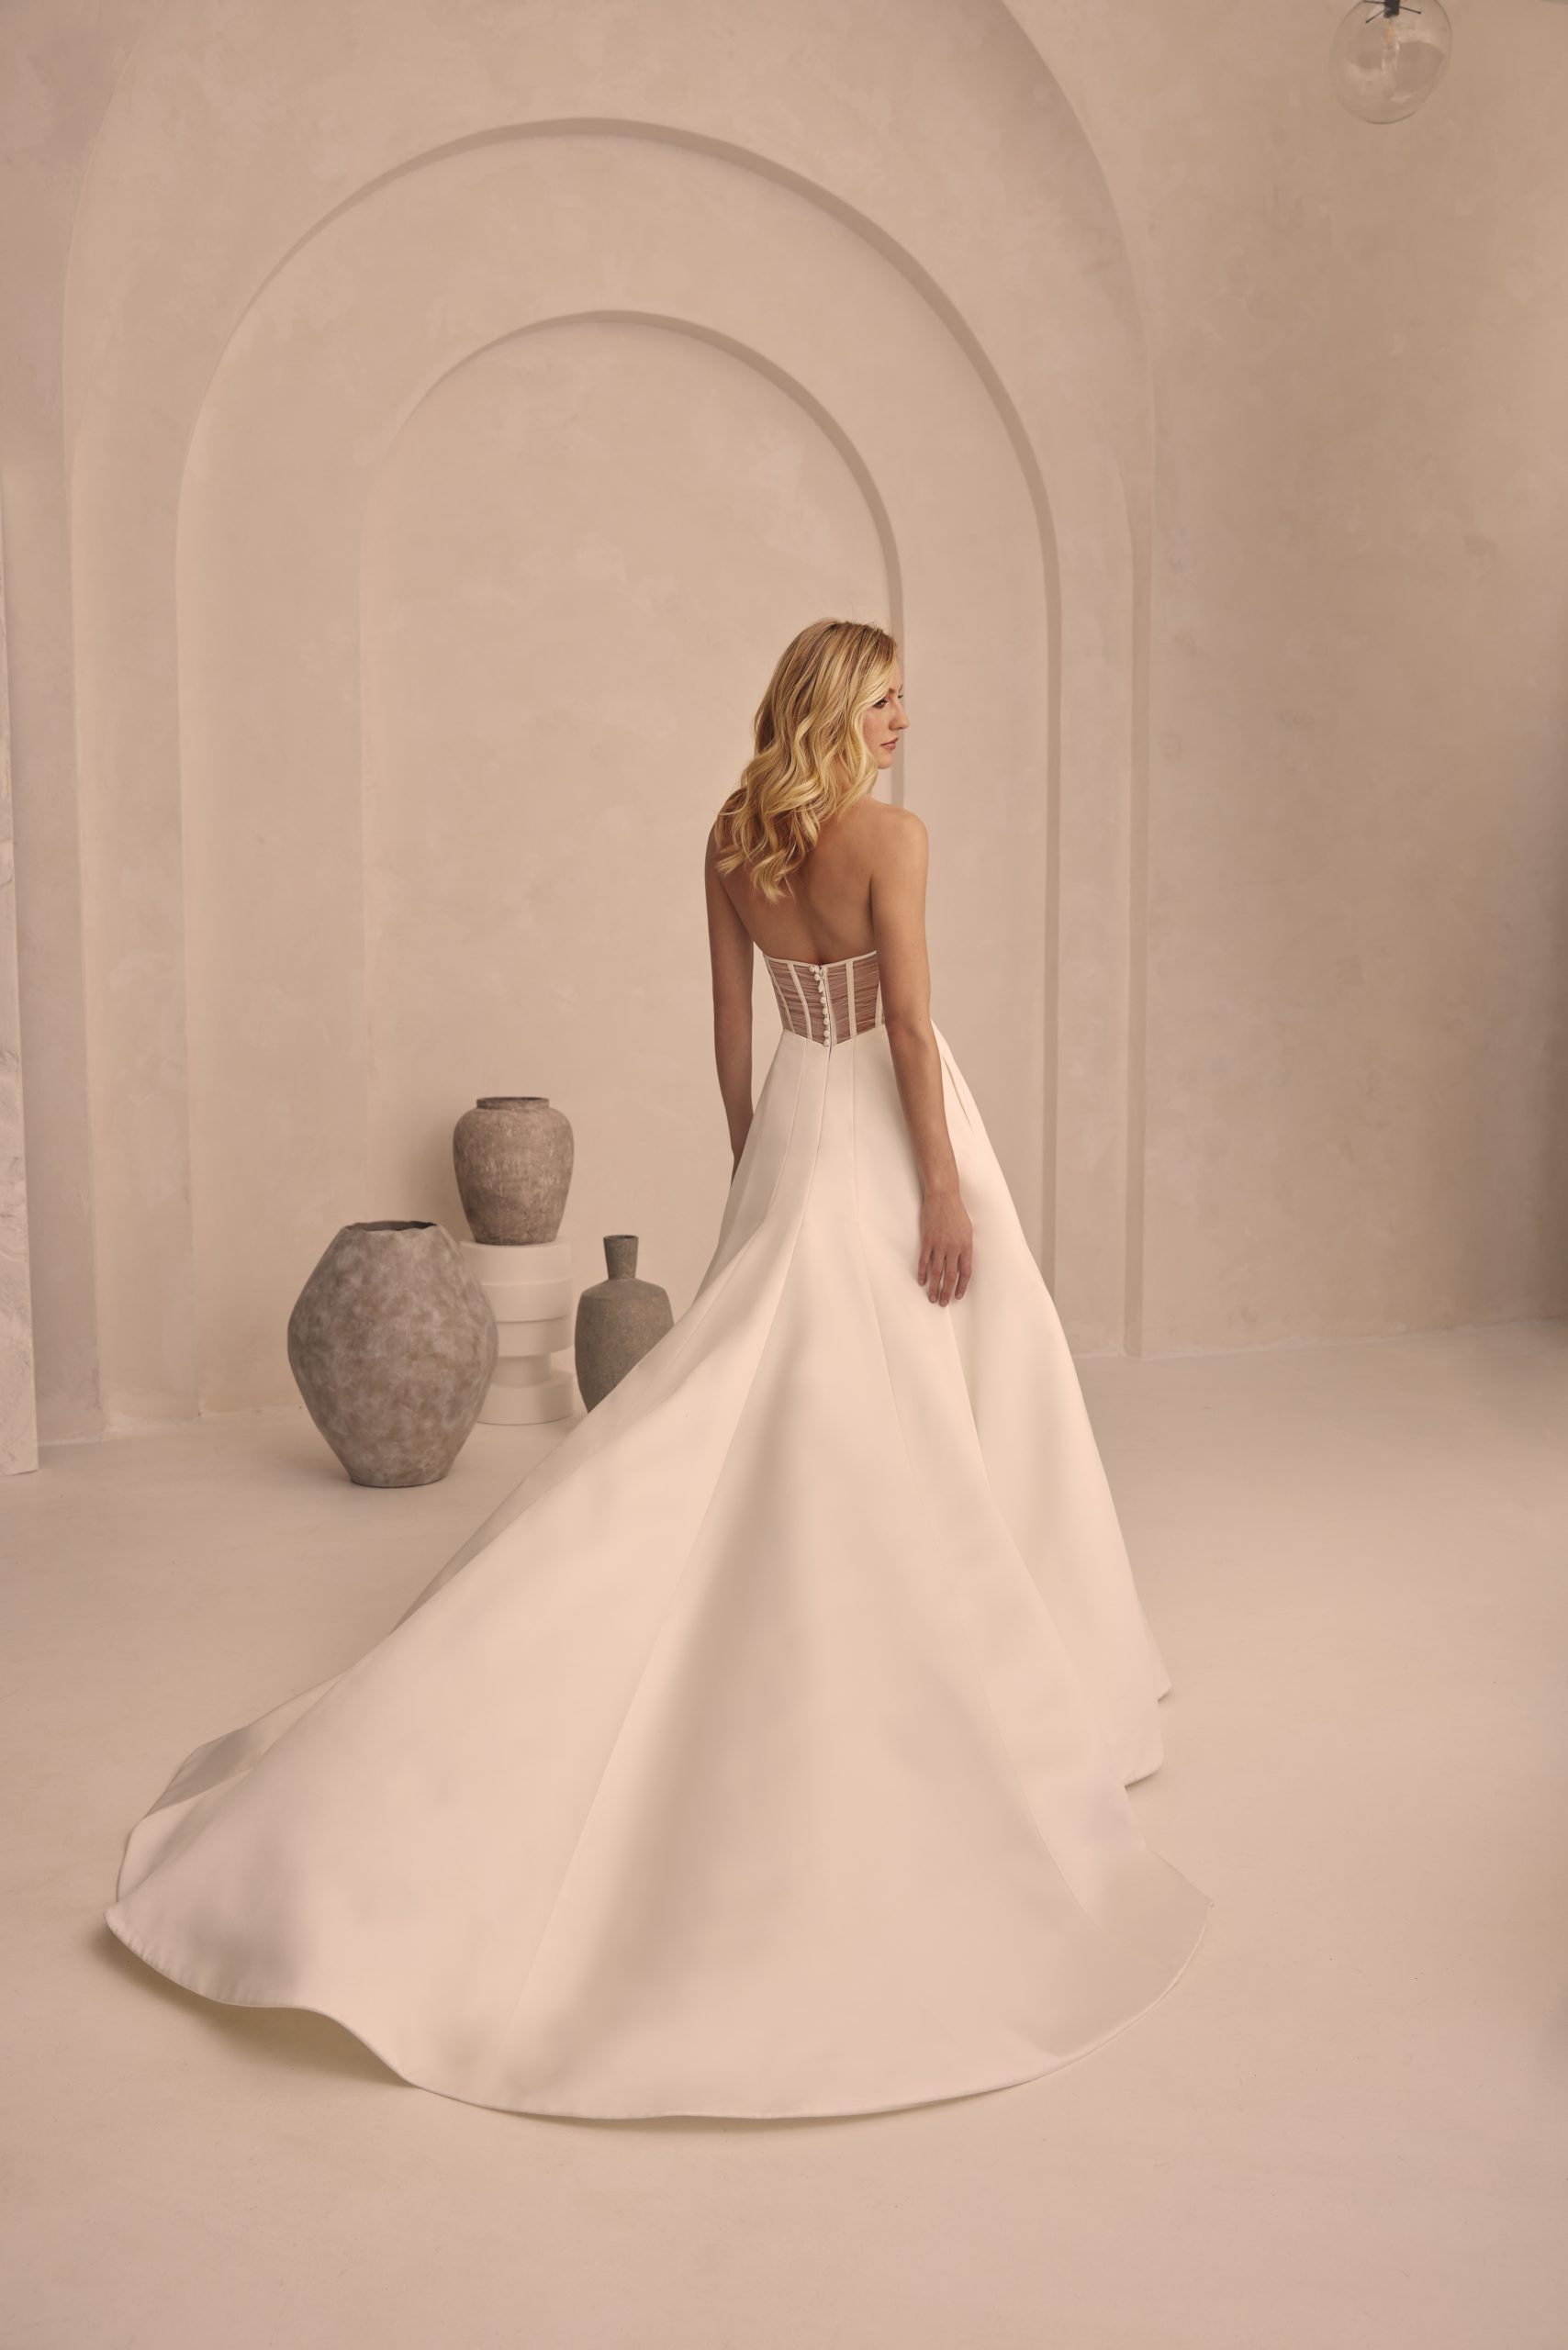 Chic and Simple Satin Modified A-Line Wedding Dress With Buttons by Mikaella Bridal - Image 3